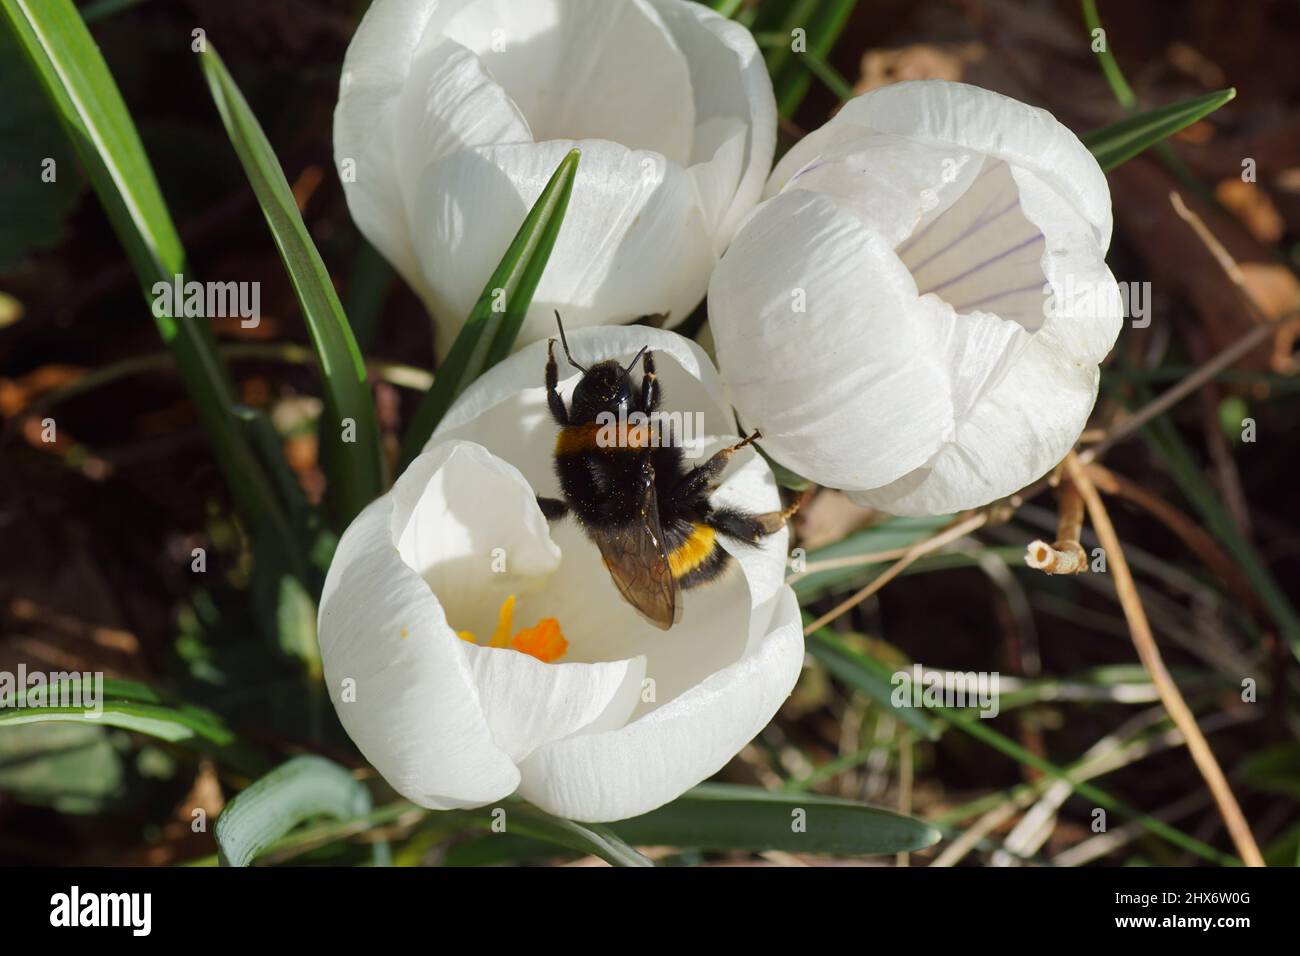 Queen, bumblebee species in the Bombus lucorum-complex, family Apidae on white flowers of crocus, family Iridaceae. Dutch garden. March, Late winter Stock Photo